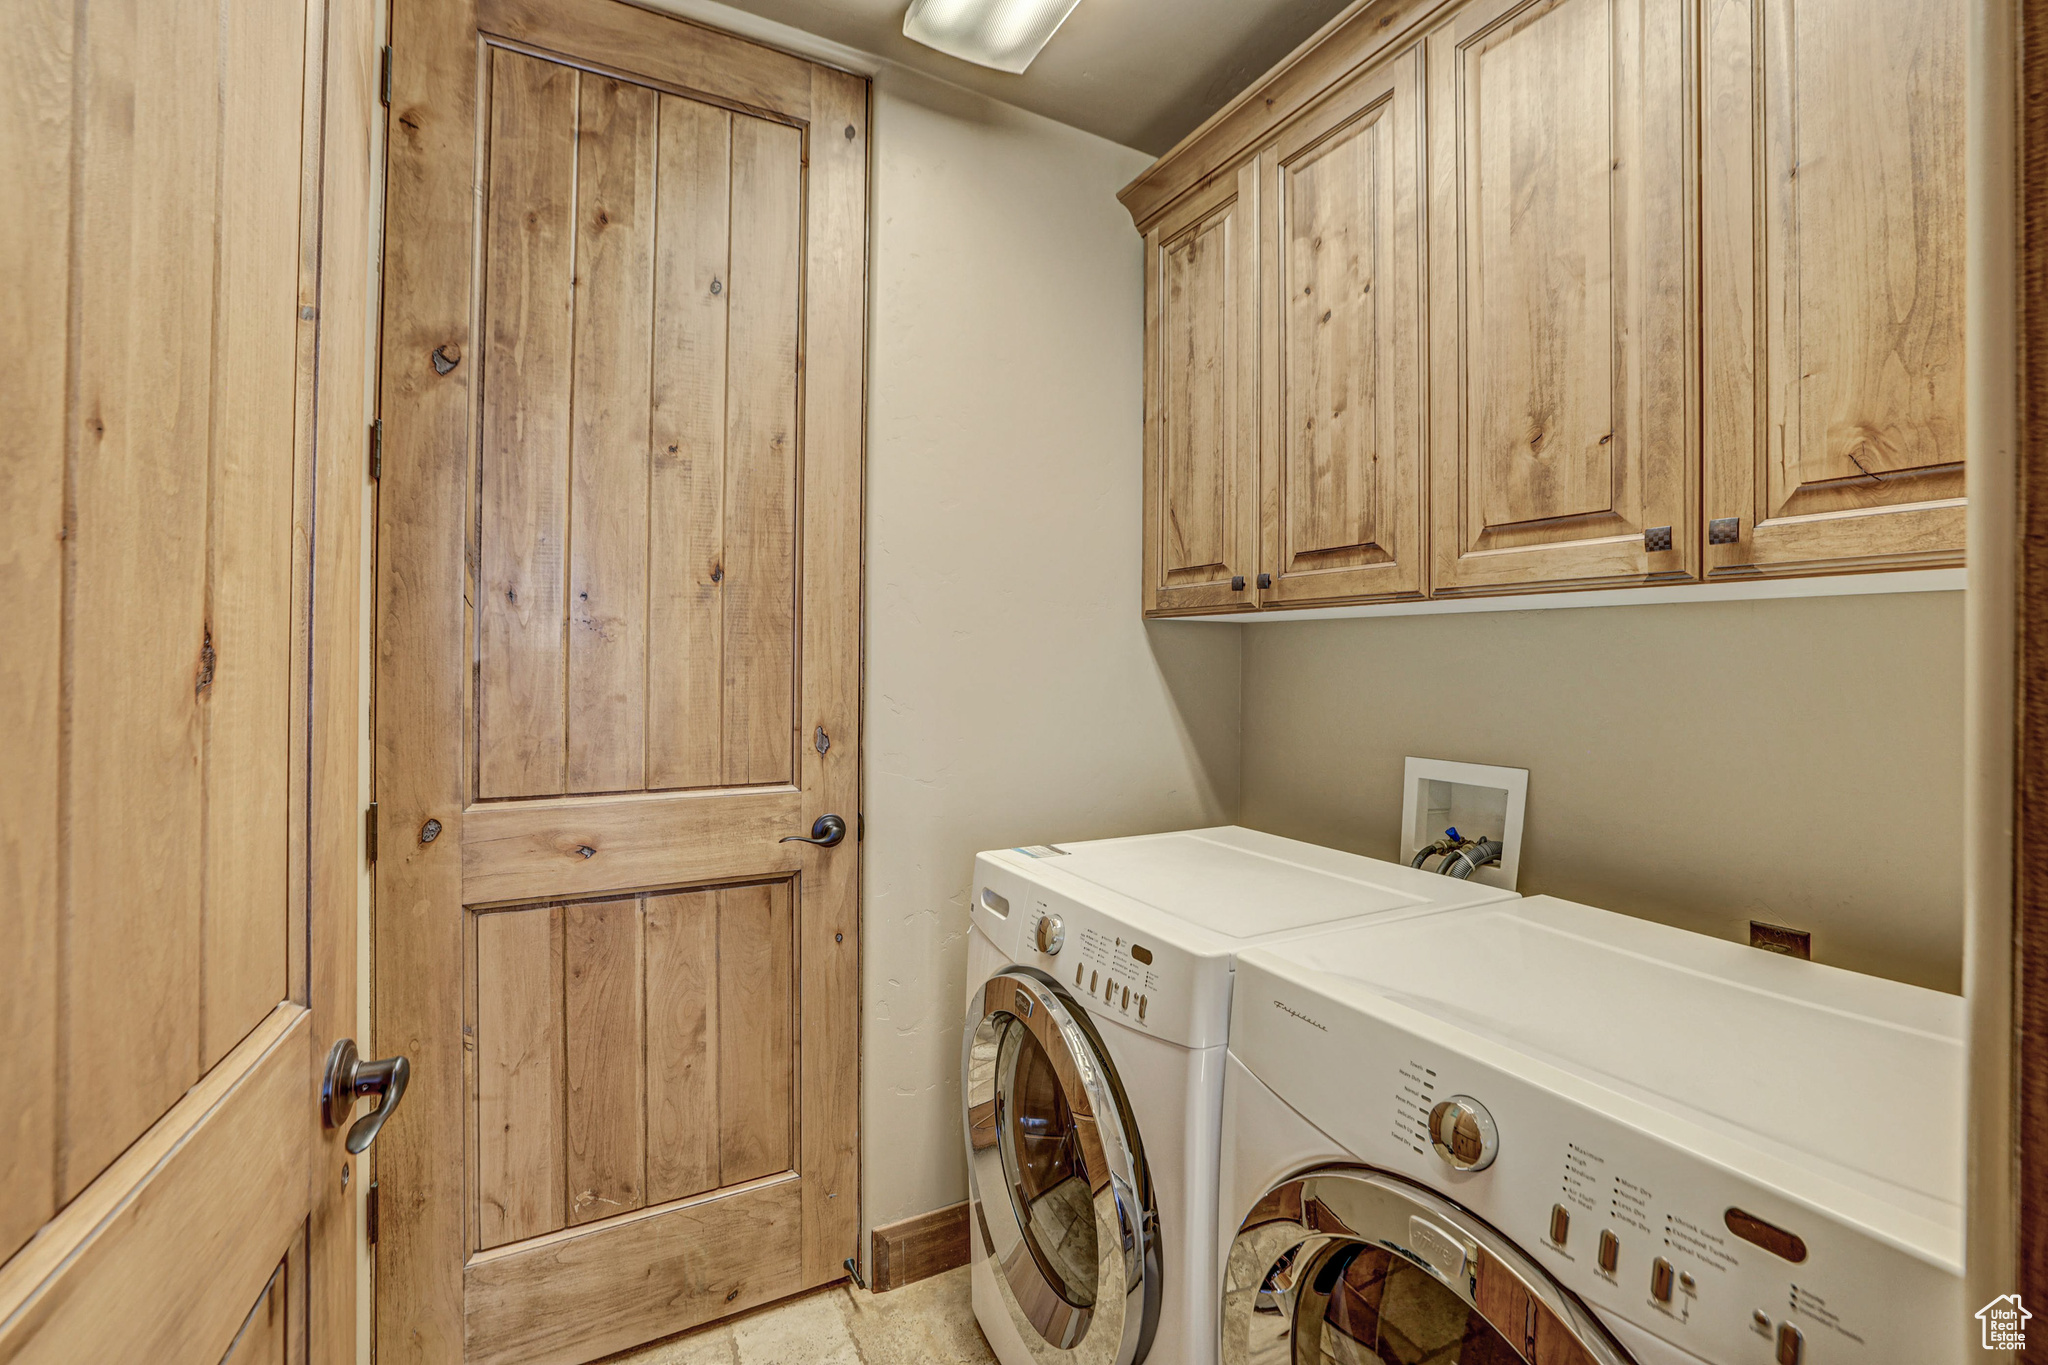 Laundry area featuring washer and dryer, cabinets, light tile floors, and washer hookup